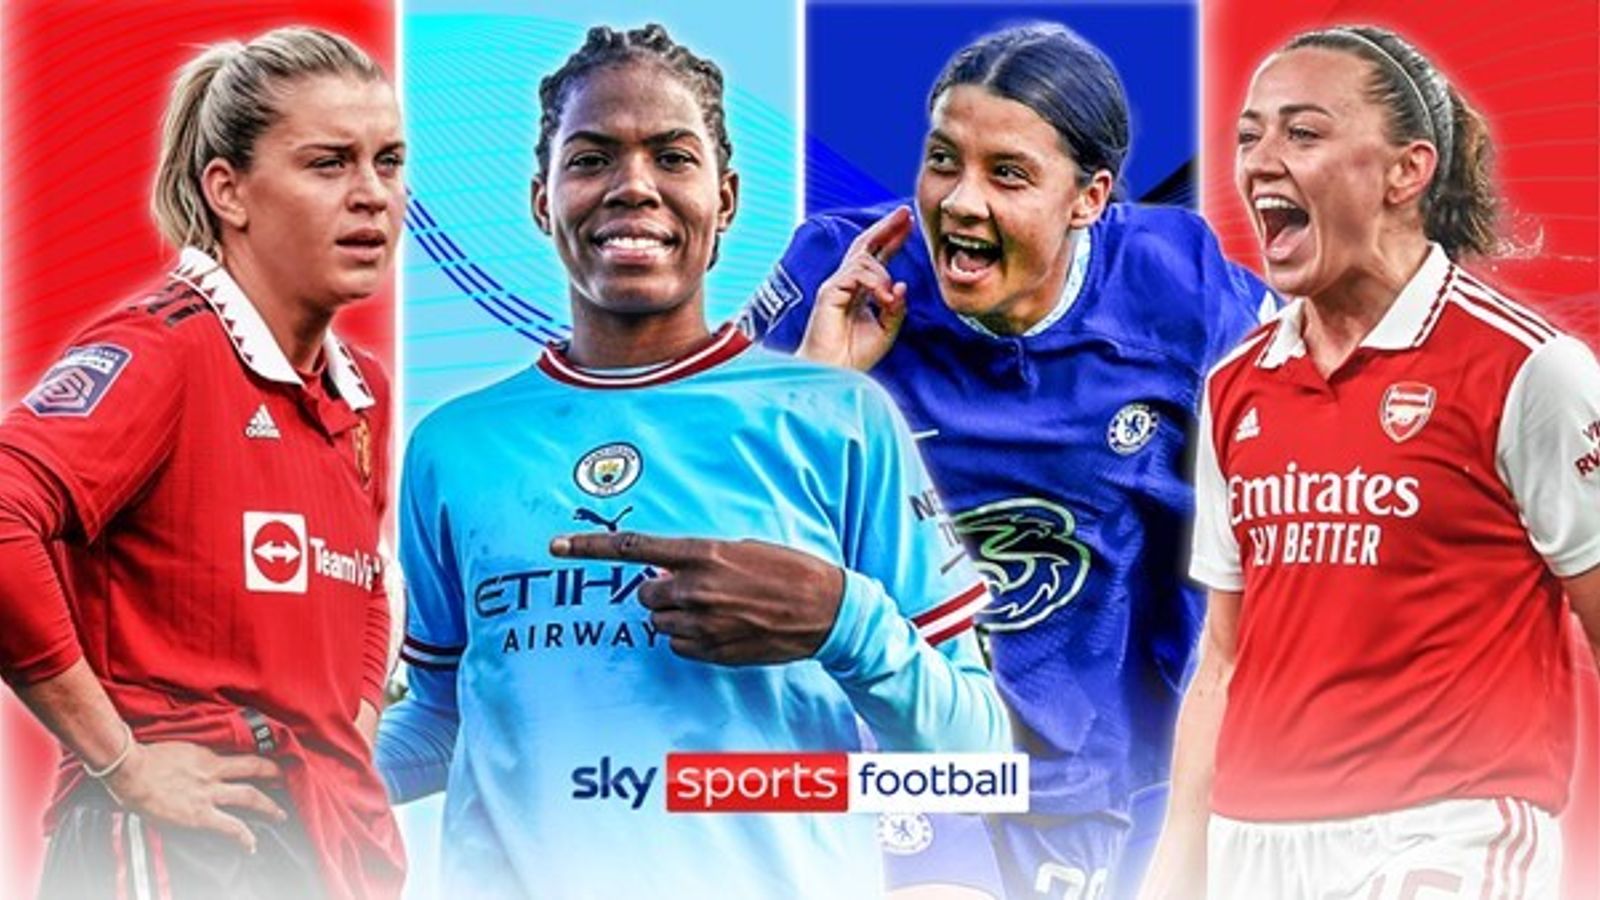 wsl-live-on-sky-sports-new-fixtures-announced-as-title-race-unfolds-between-man-utd-chelsea-arsenal-and-man-city